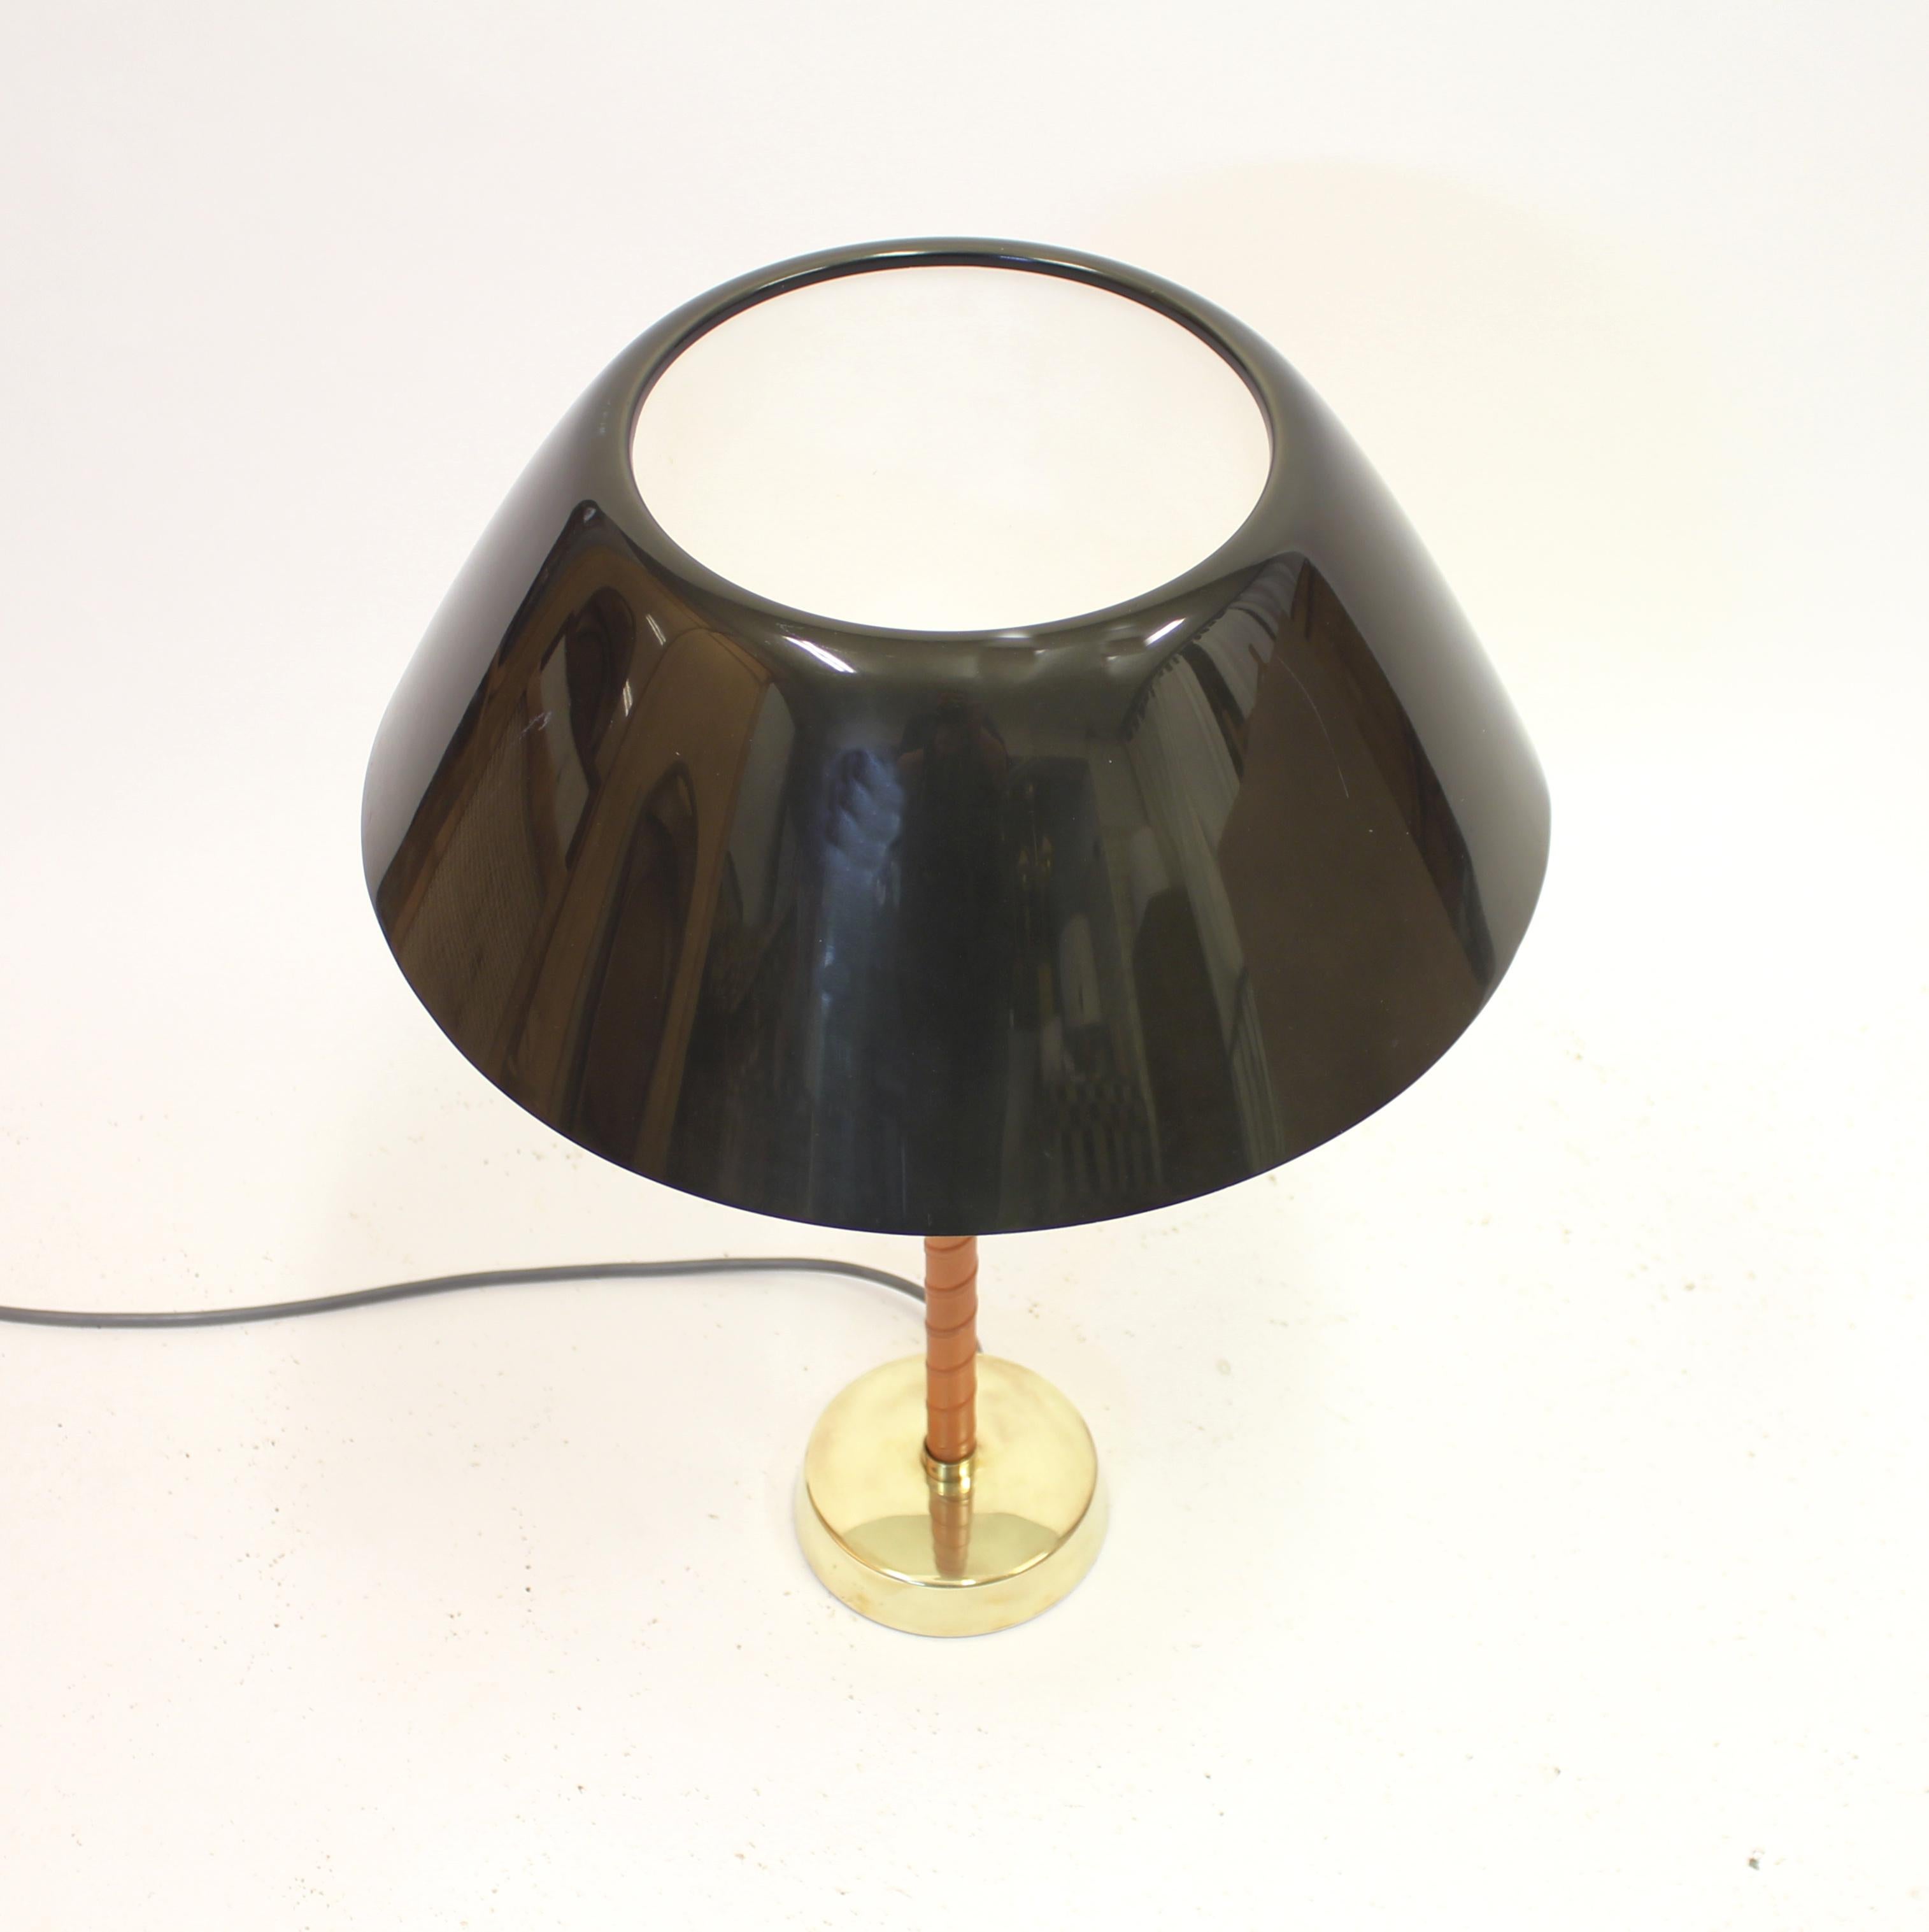 20th Century Lisa Johansson-Pape, Brass and Leather Senator Table Lamp for Orno, 1950s